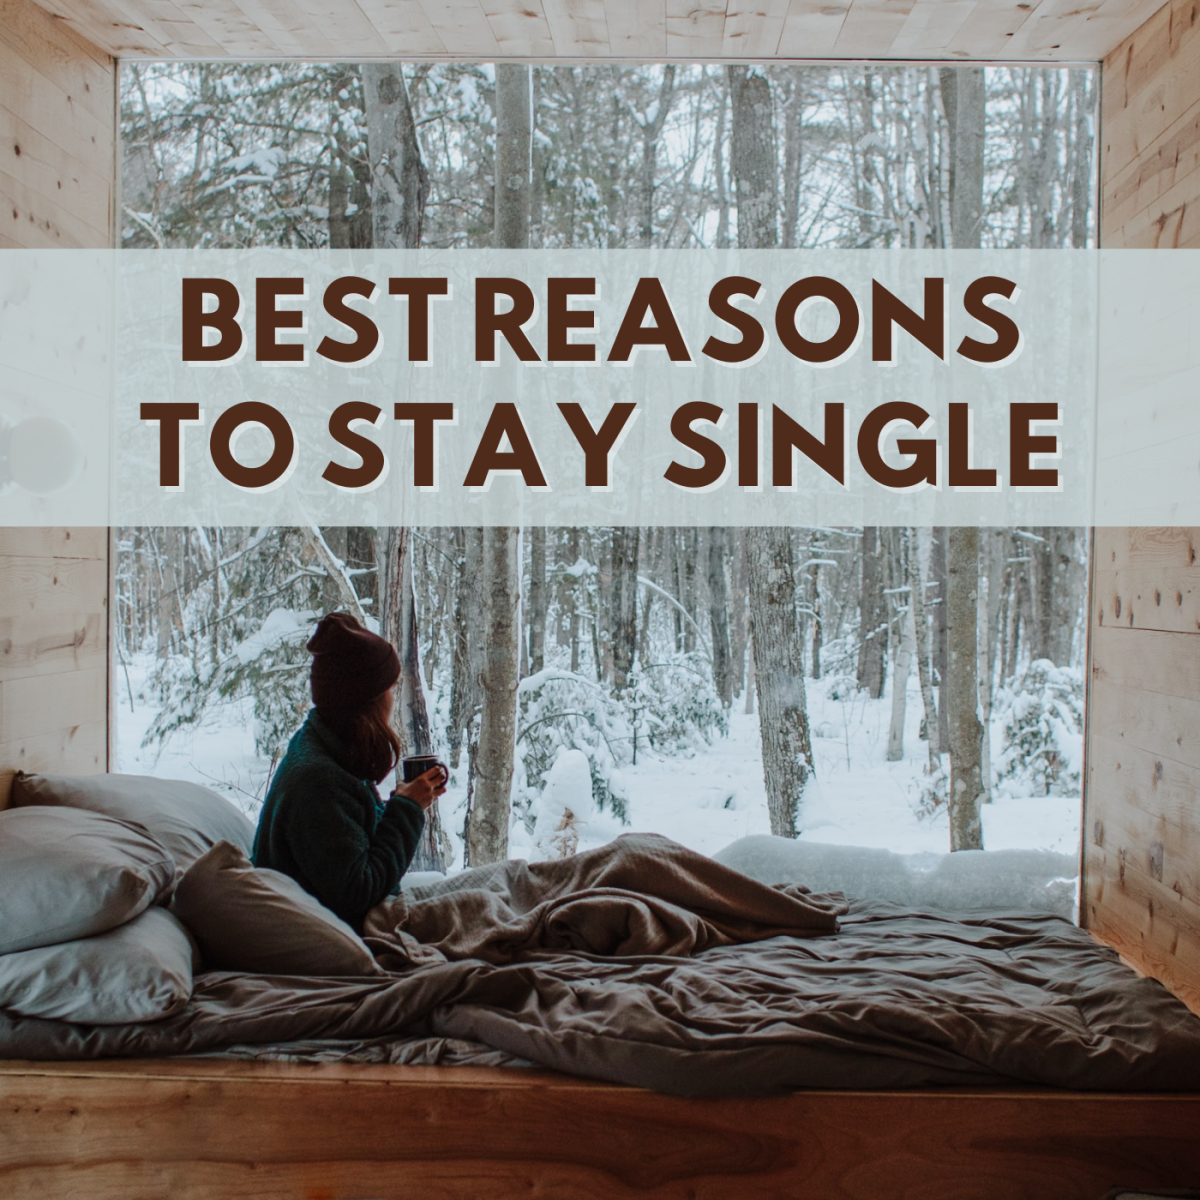 11 Best Reasons to Stay Single